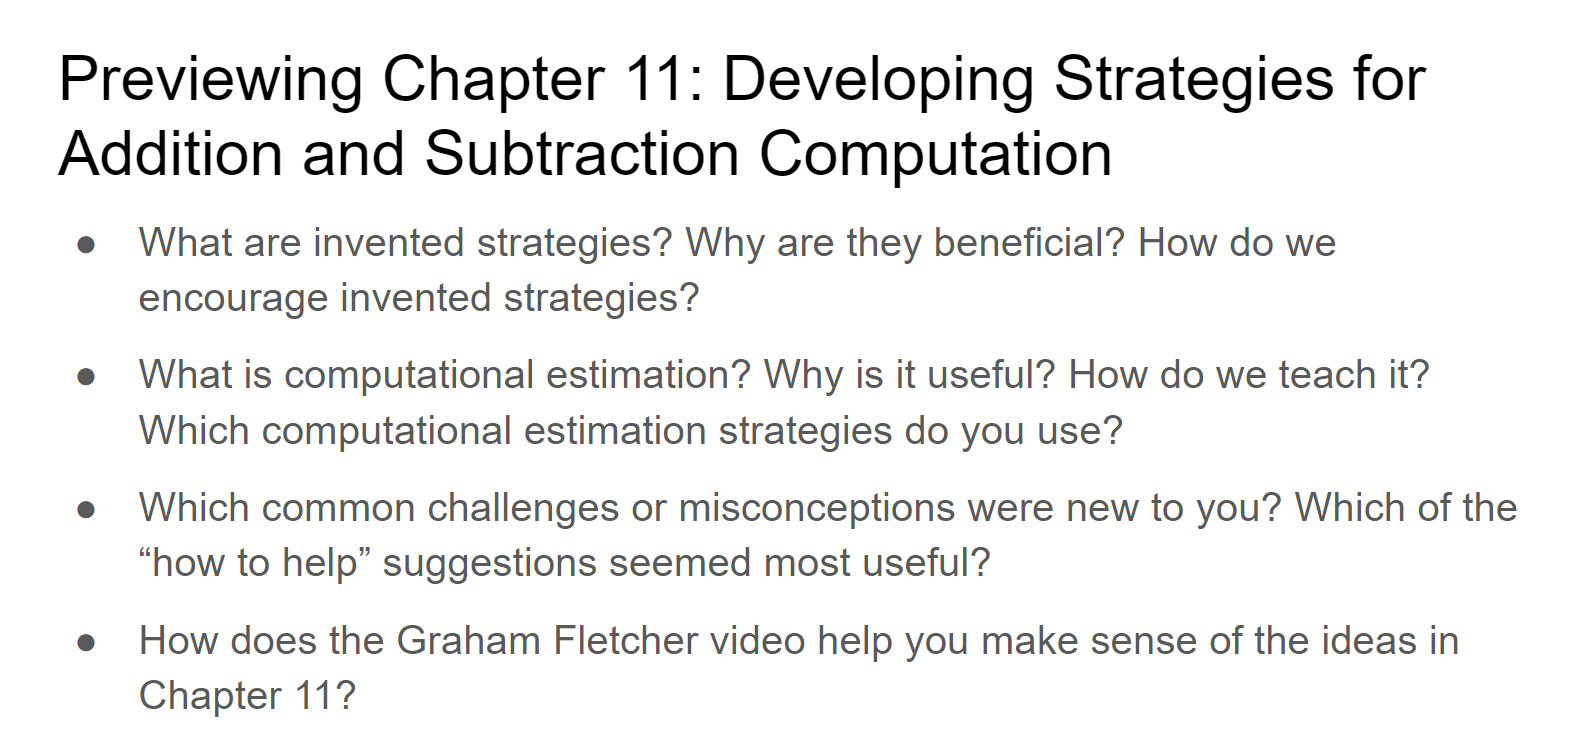 Screenshot showing example questions. It reads: "Previewing Chapter 11: Developing Strategies for Addition and Subtraction Computation. [Bullet] What are inverted strategies? Why are they beneficial? How do we encourage inverted strategies? [Bullet] What is computational estimation? Why is it useful? How do we teach it? Which computational estimation strategies do you use? [Bullet] Which common challenges or misconceptions were new to you? Which of the 'how to help' suggestions seemed most useful? [Bullet] How does the Graham Fletcher video help you make sense of the ideas in Chapter 11?"